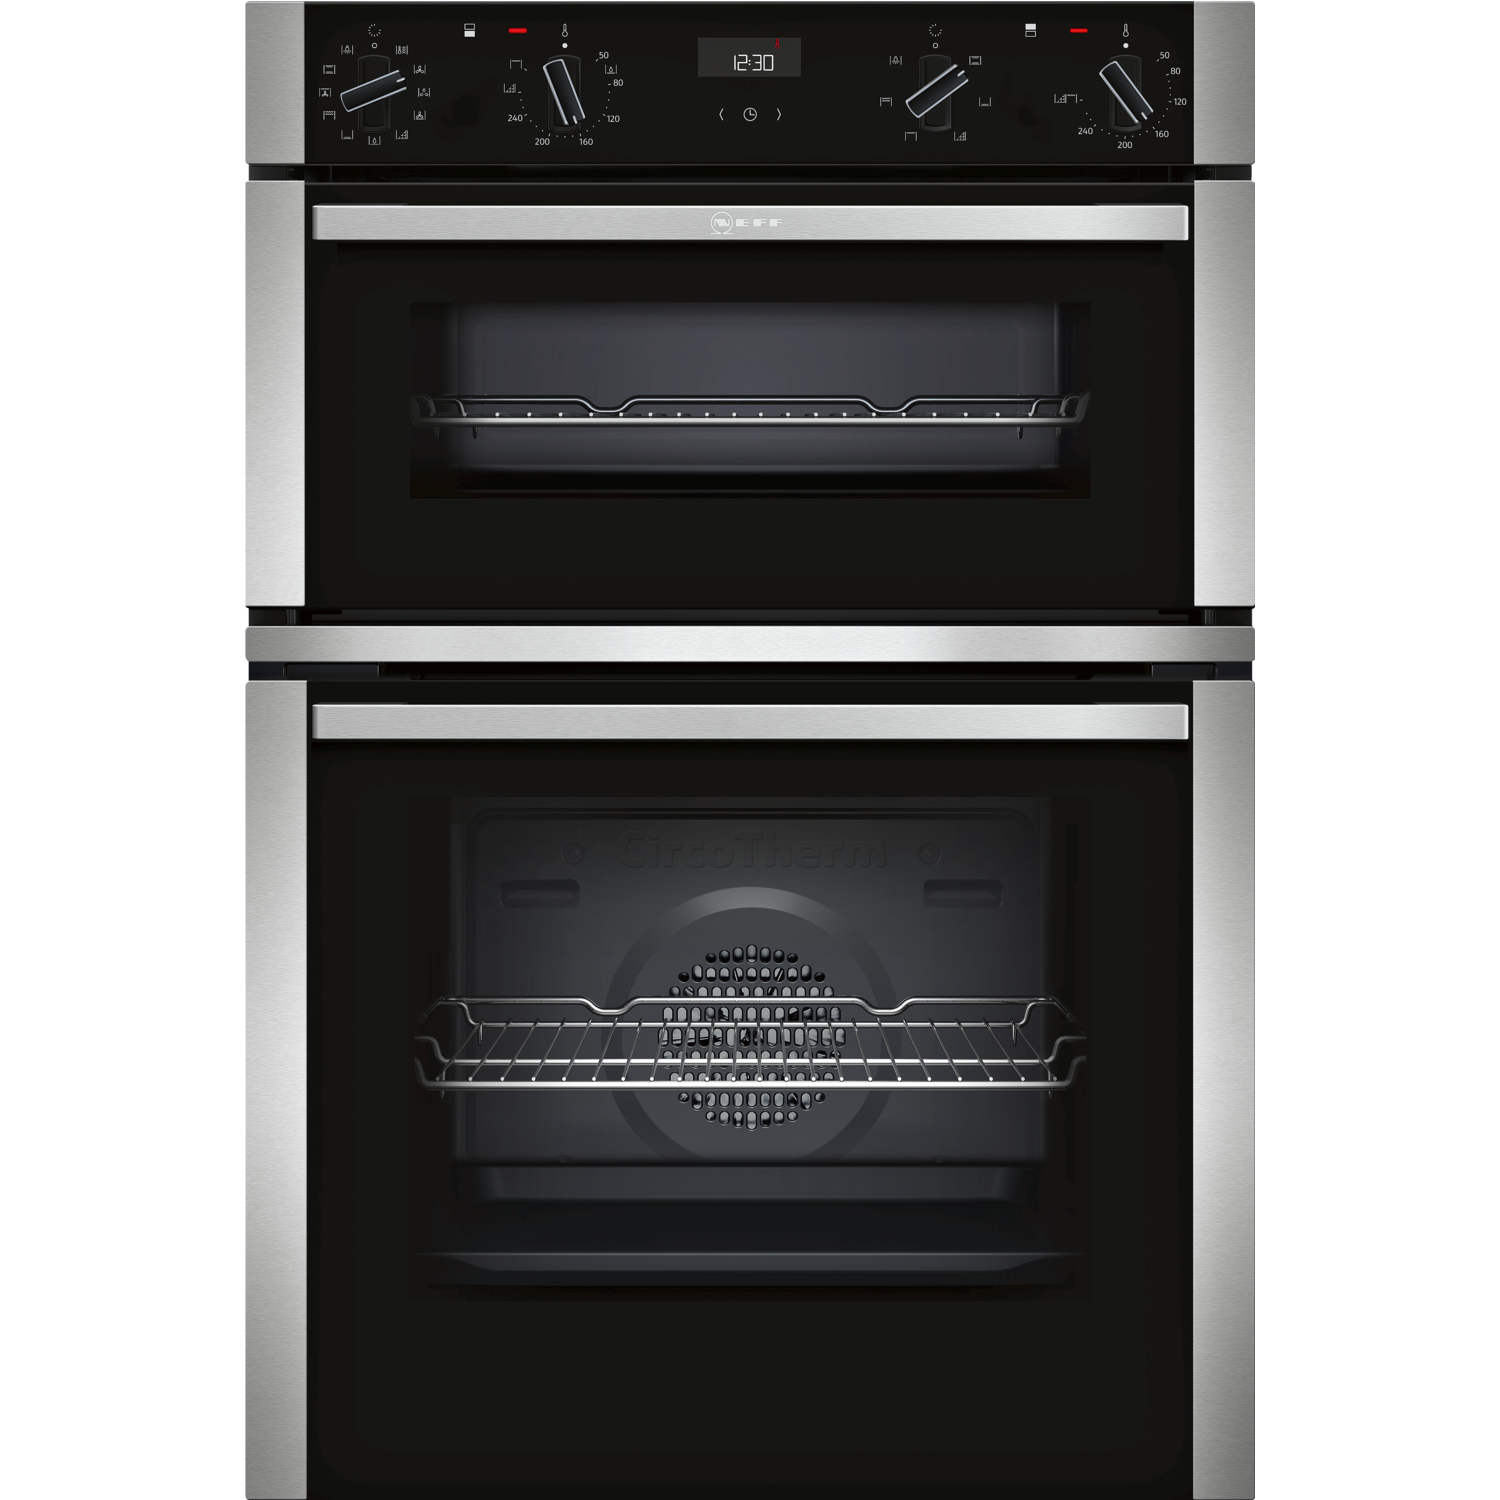 Neff N50 Electric Built In Double Oven with Catalytic Cleaning - Stainless Steel